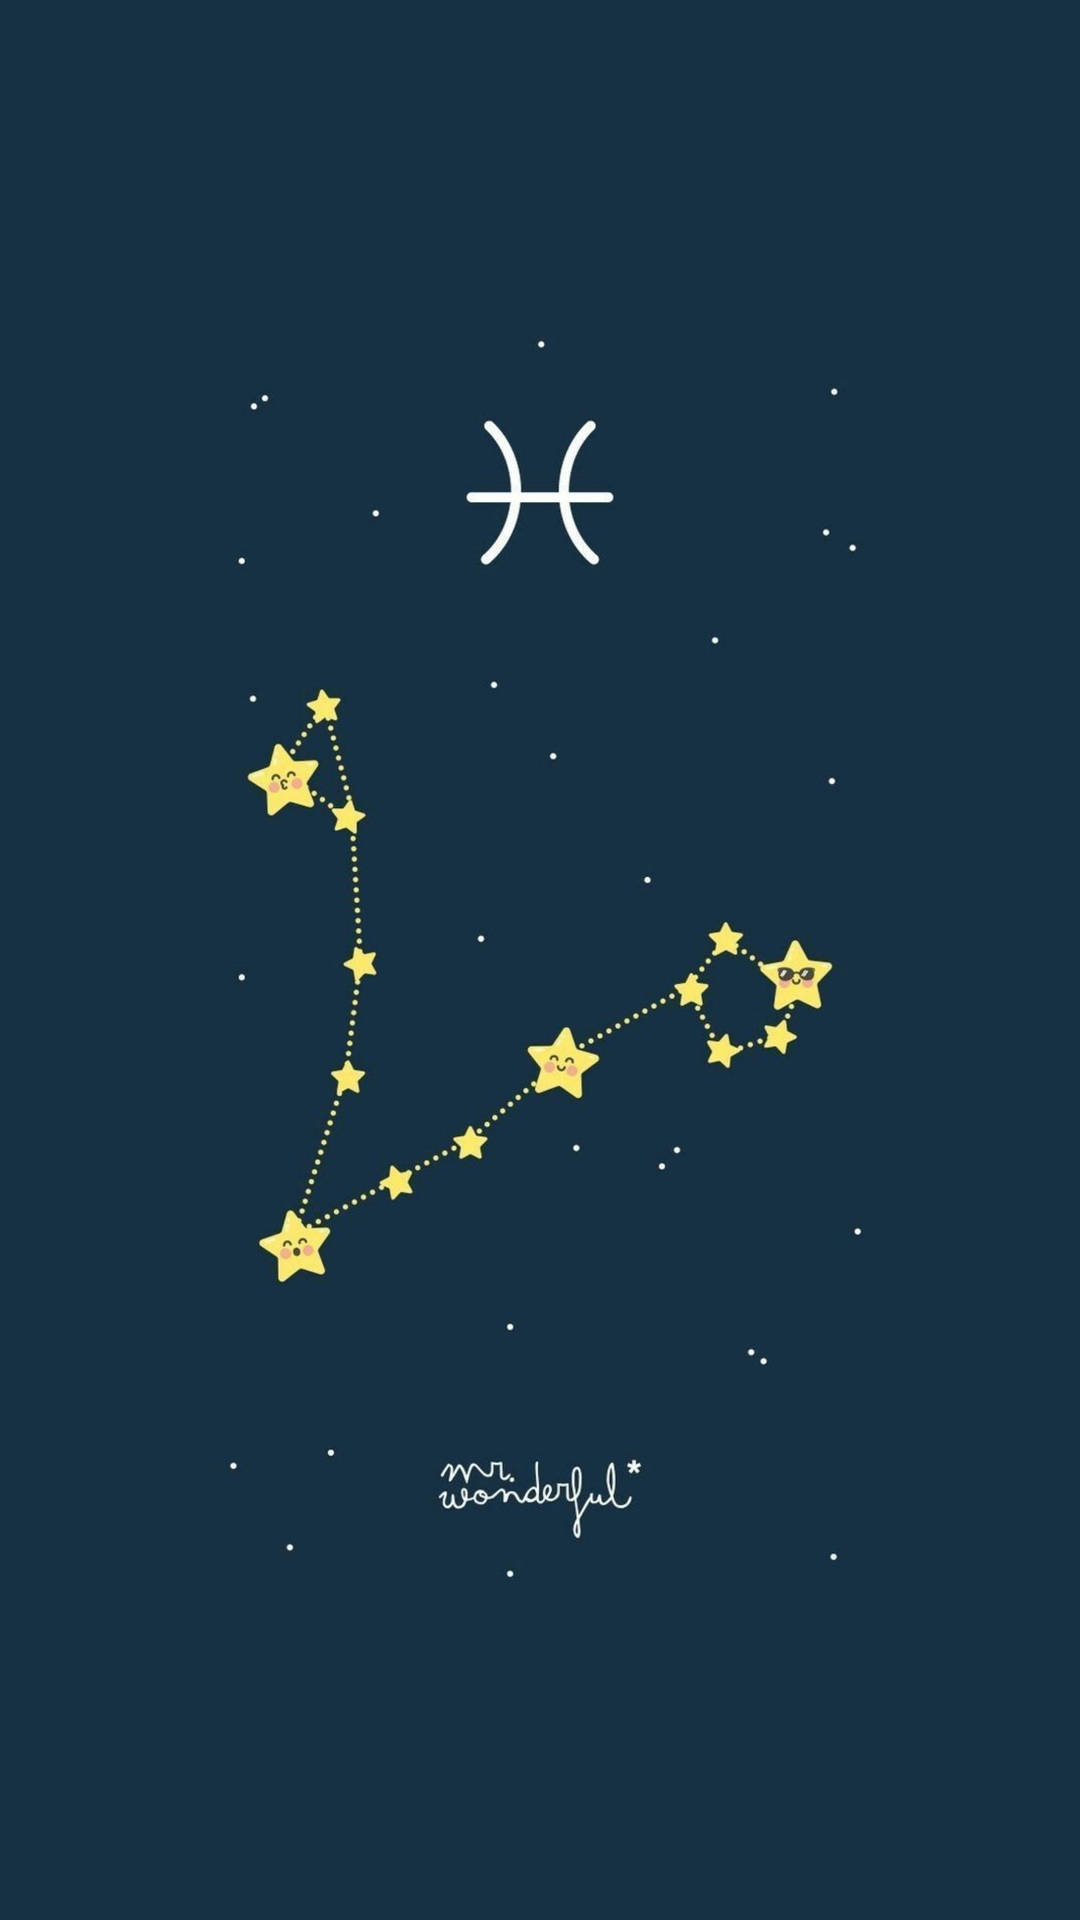 Caption: Vibrant Cartoon Illustration of Pisces Constellation in the Starry Night Sky Wallpaper